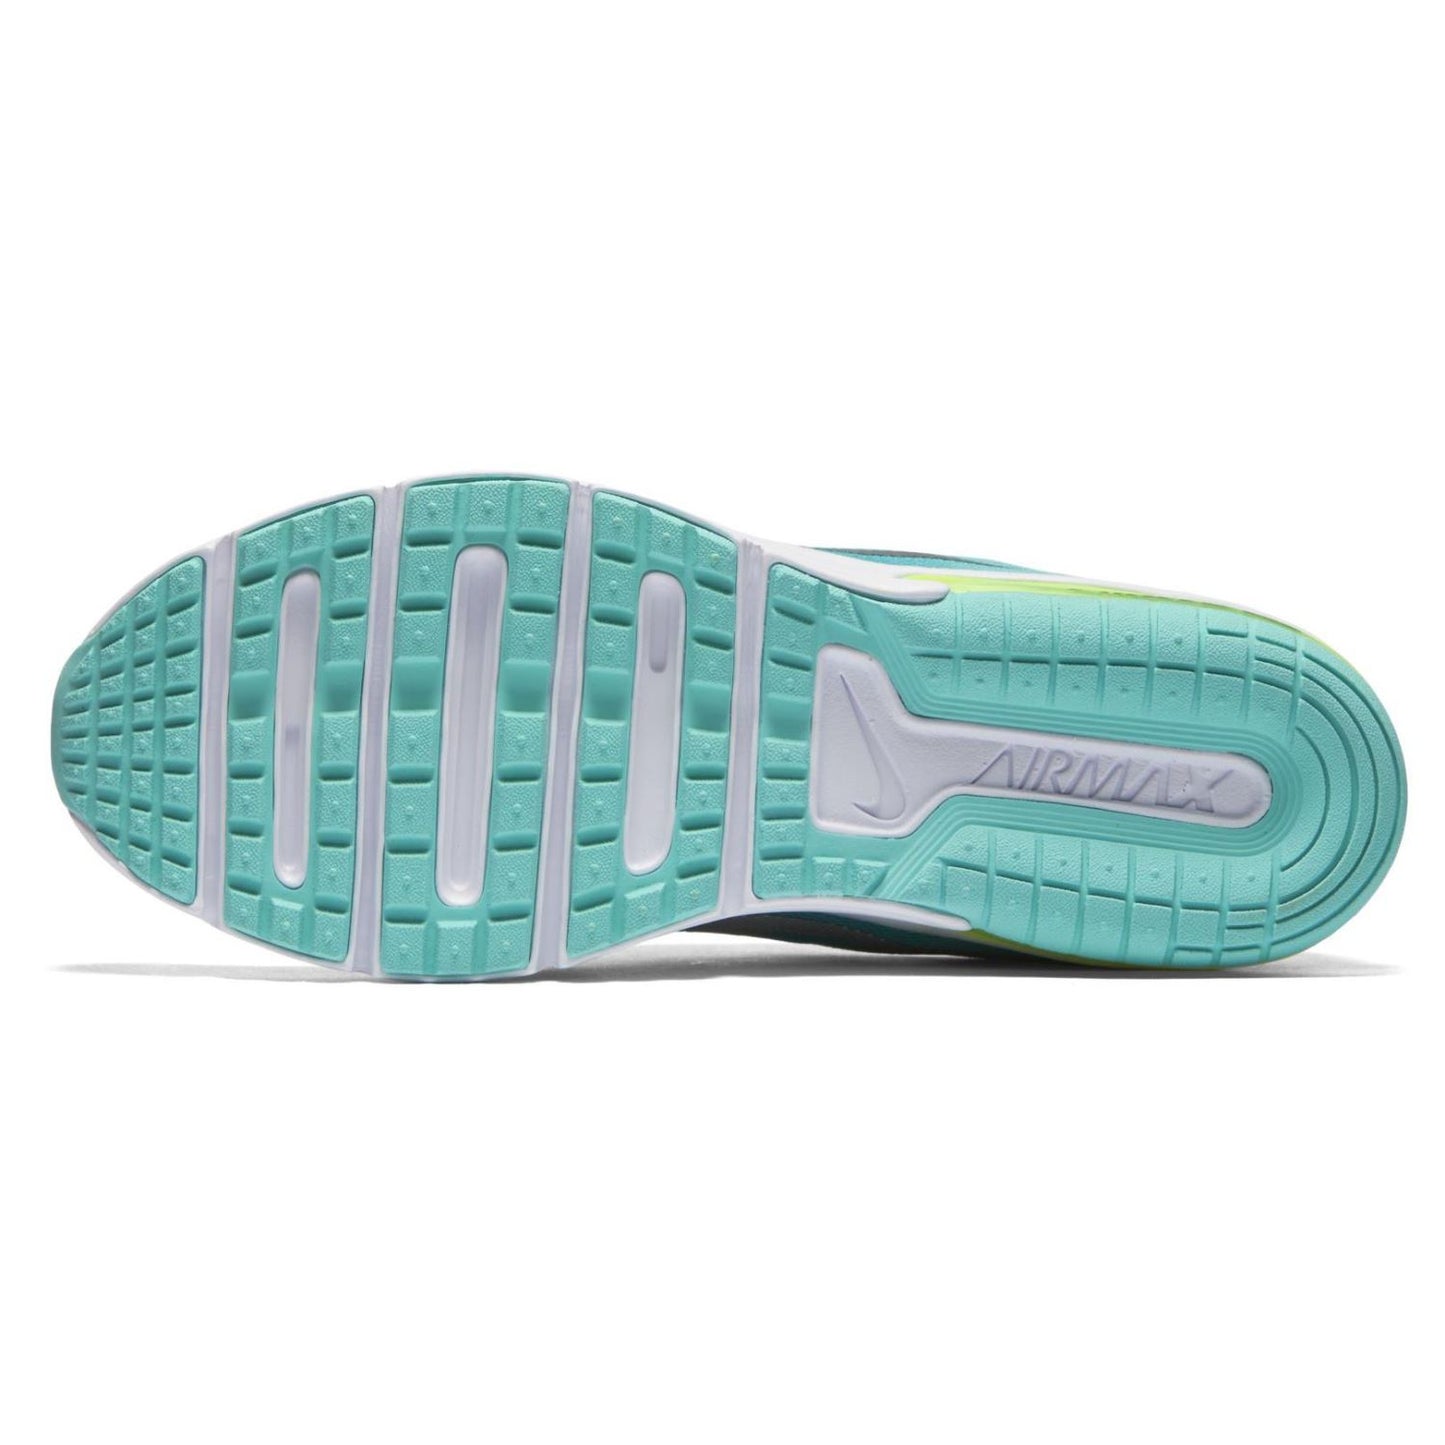 NIKE AIR MAX SEQUENT /GIRLS GREEN 724984 300